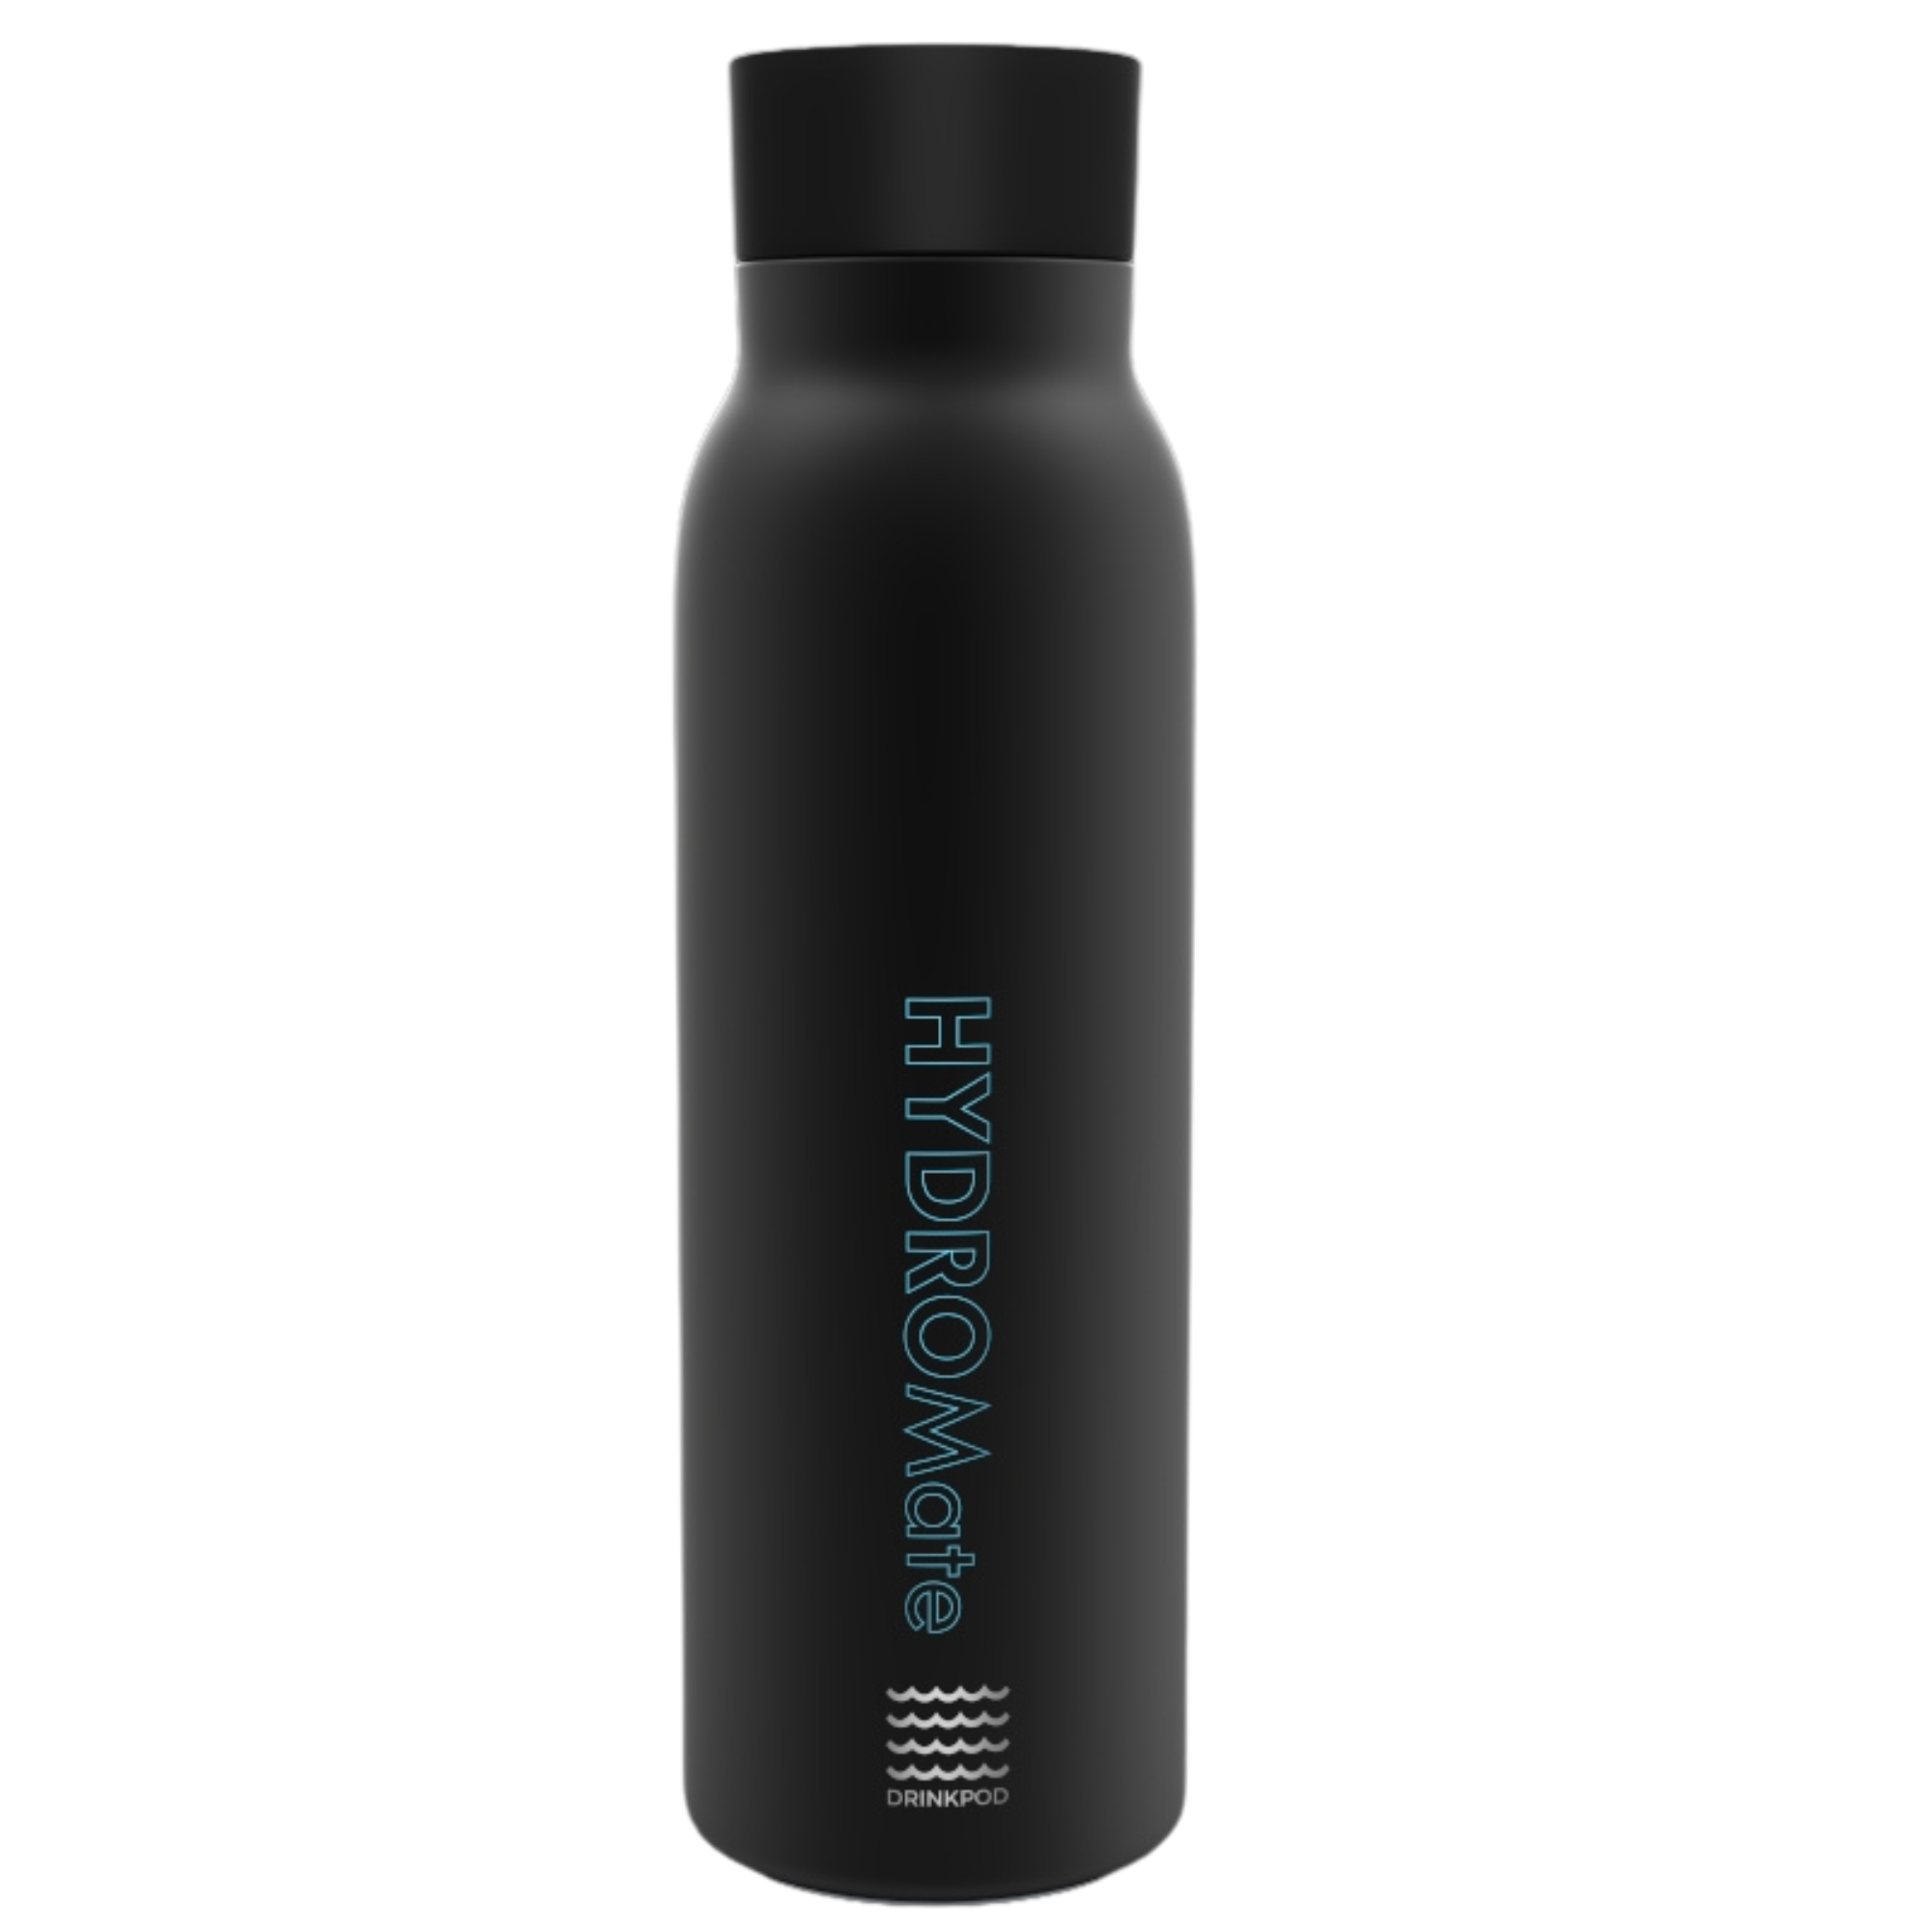 The SLM Water Bottle – An Innovative Way to Stay Hydrated 